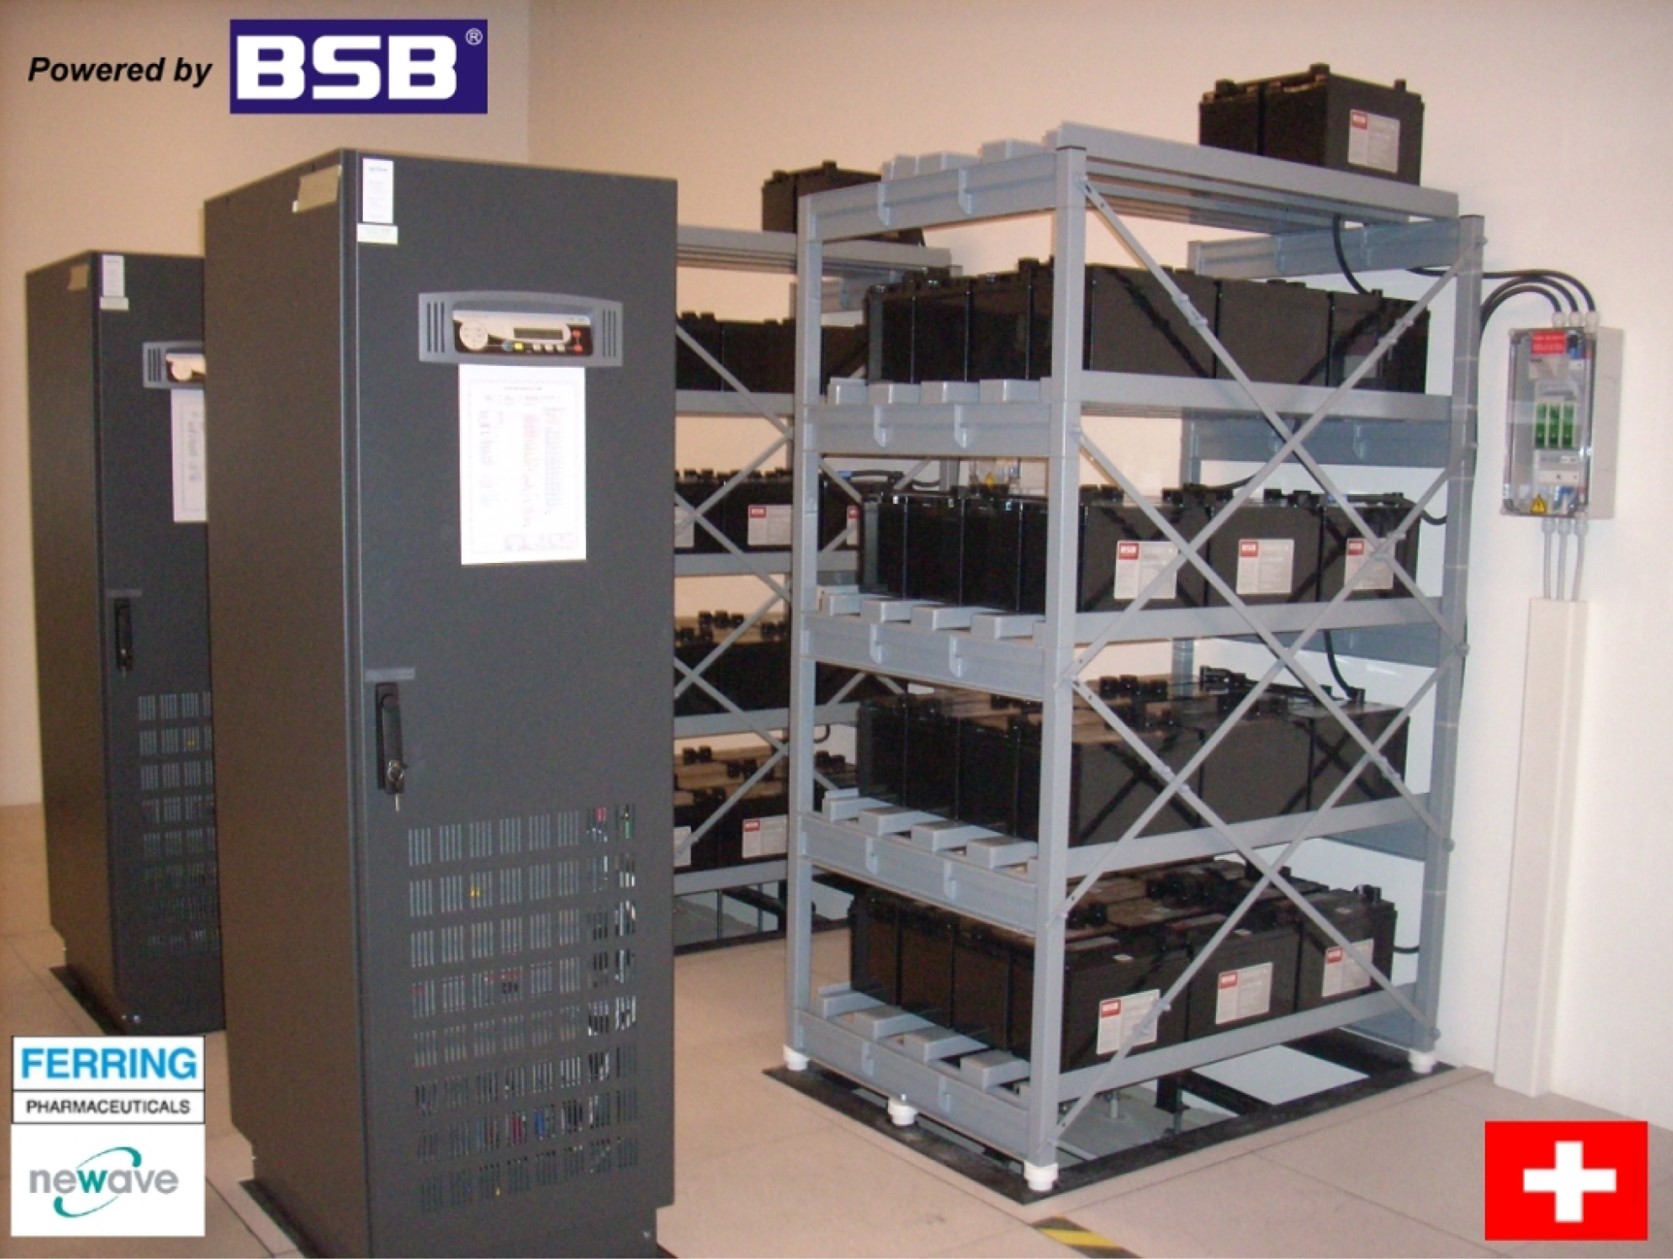 BSB High Rate Battery for UPS System of Ferring Switzerland